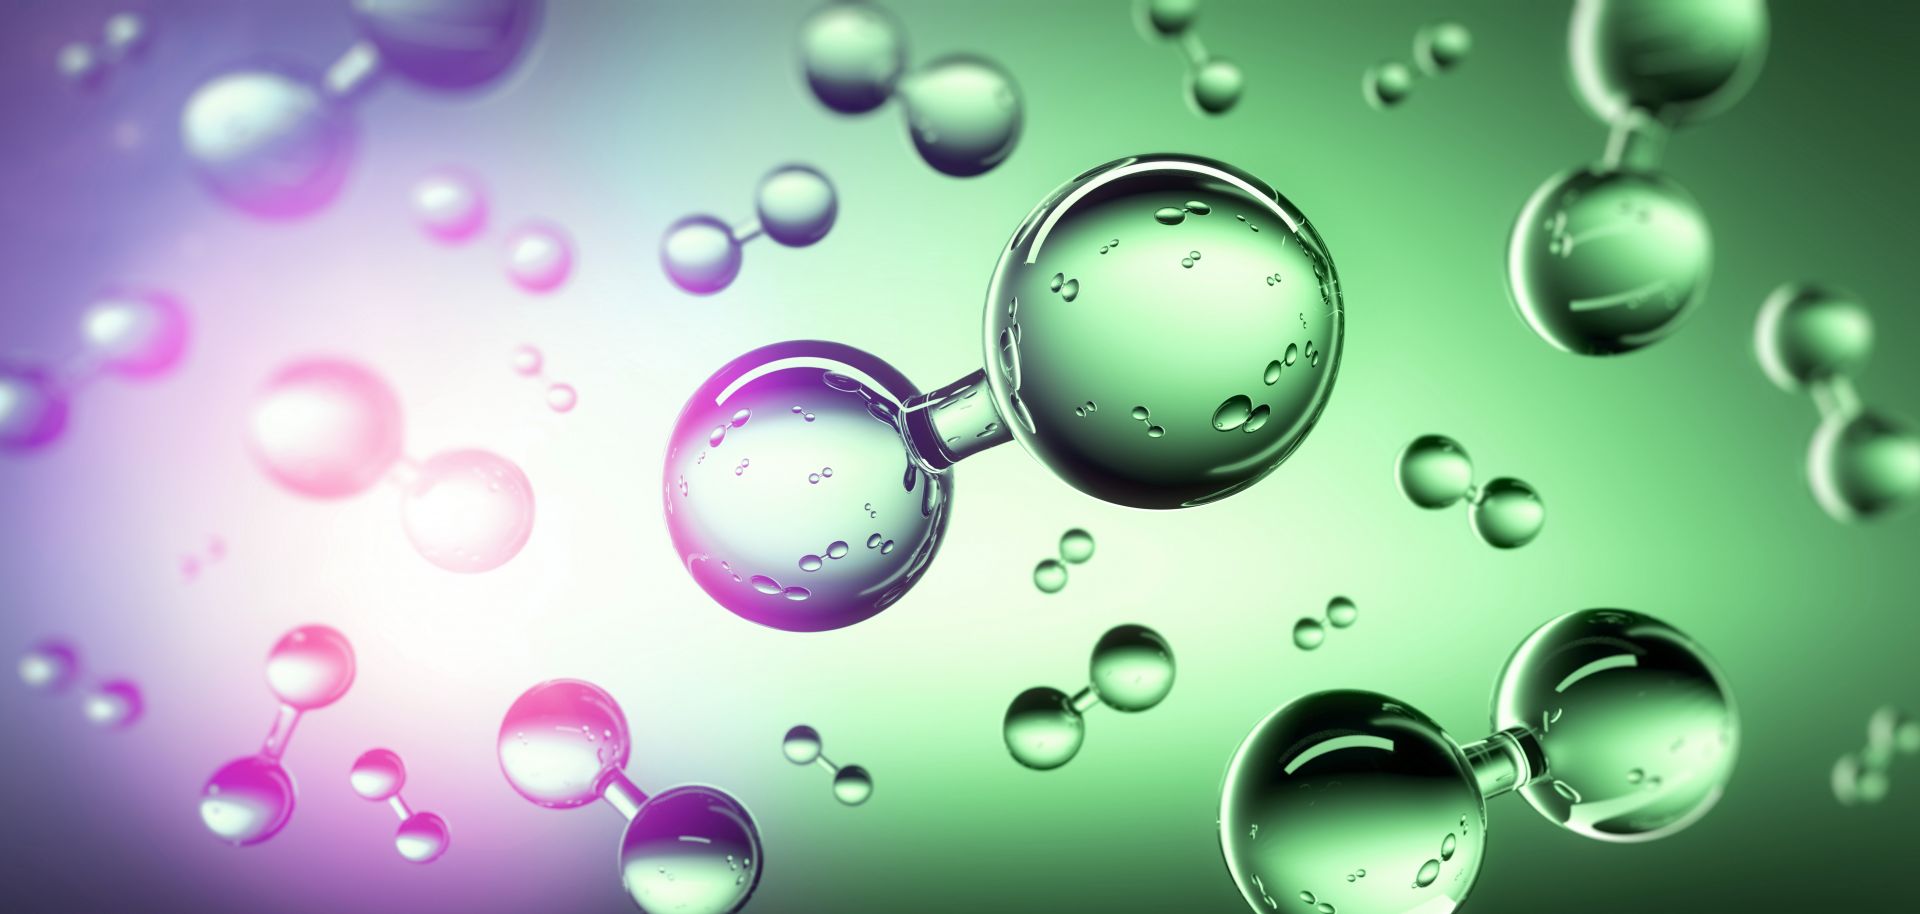 Glass-like molecules float against a green and purple background.